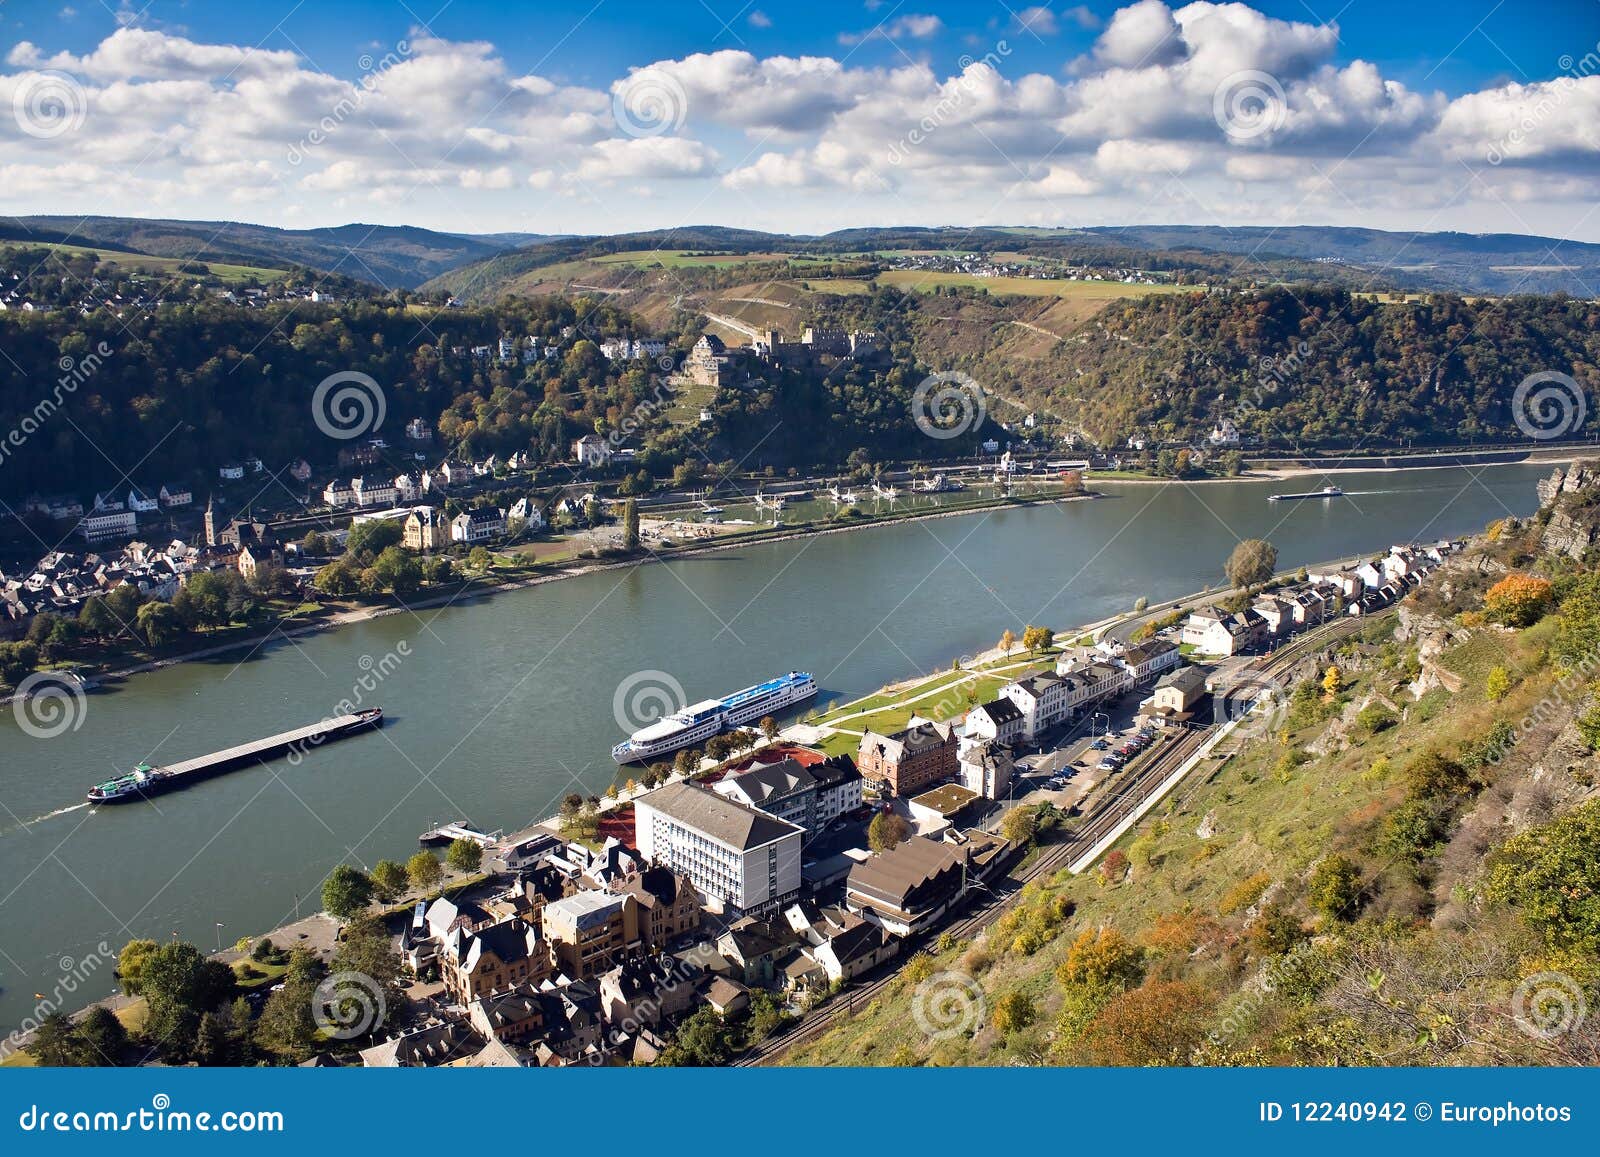 upper middle rhine valley, world heritage site